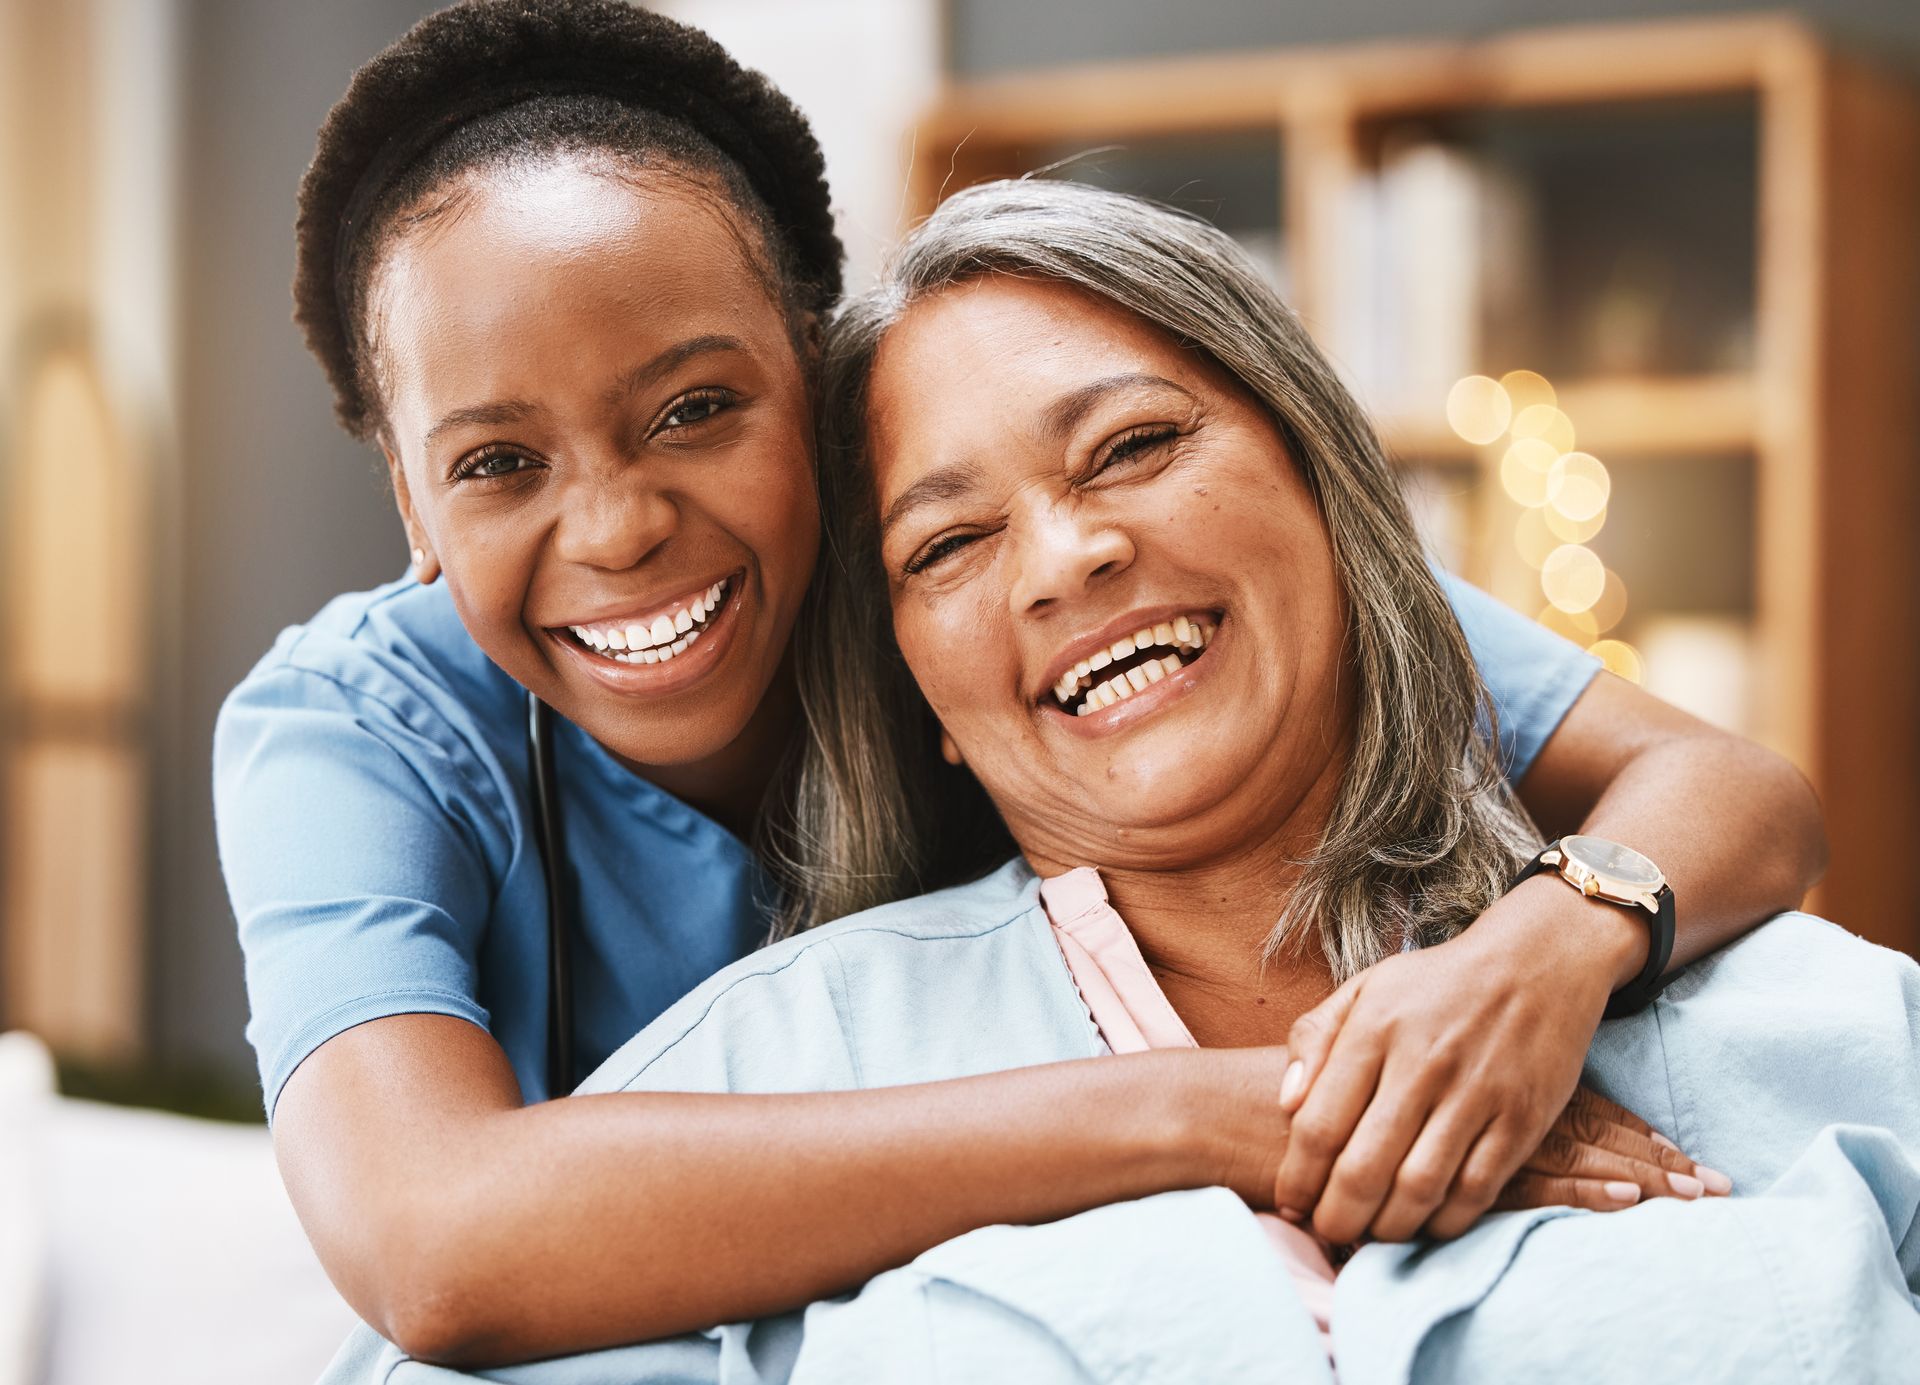 caregiver caring for a senior loved one